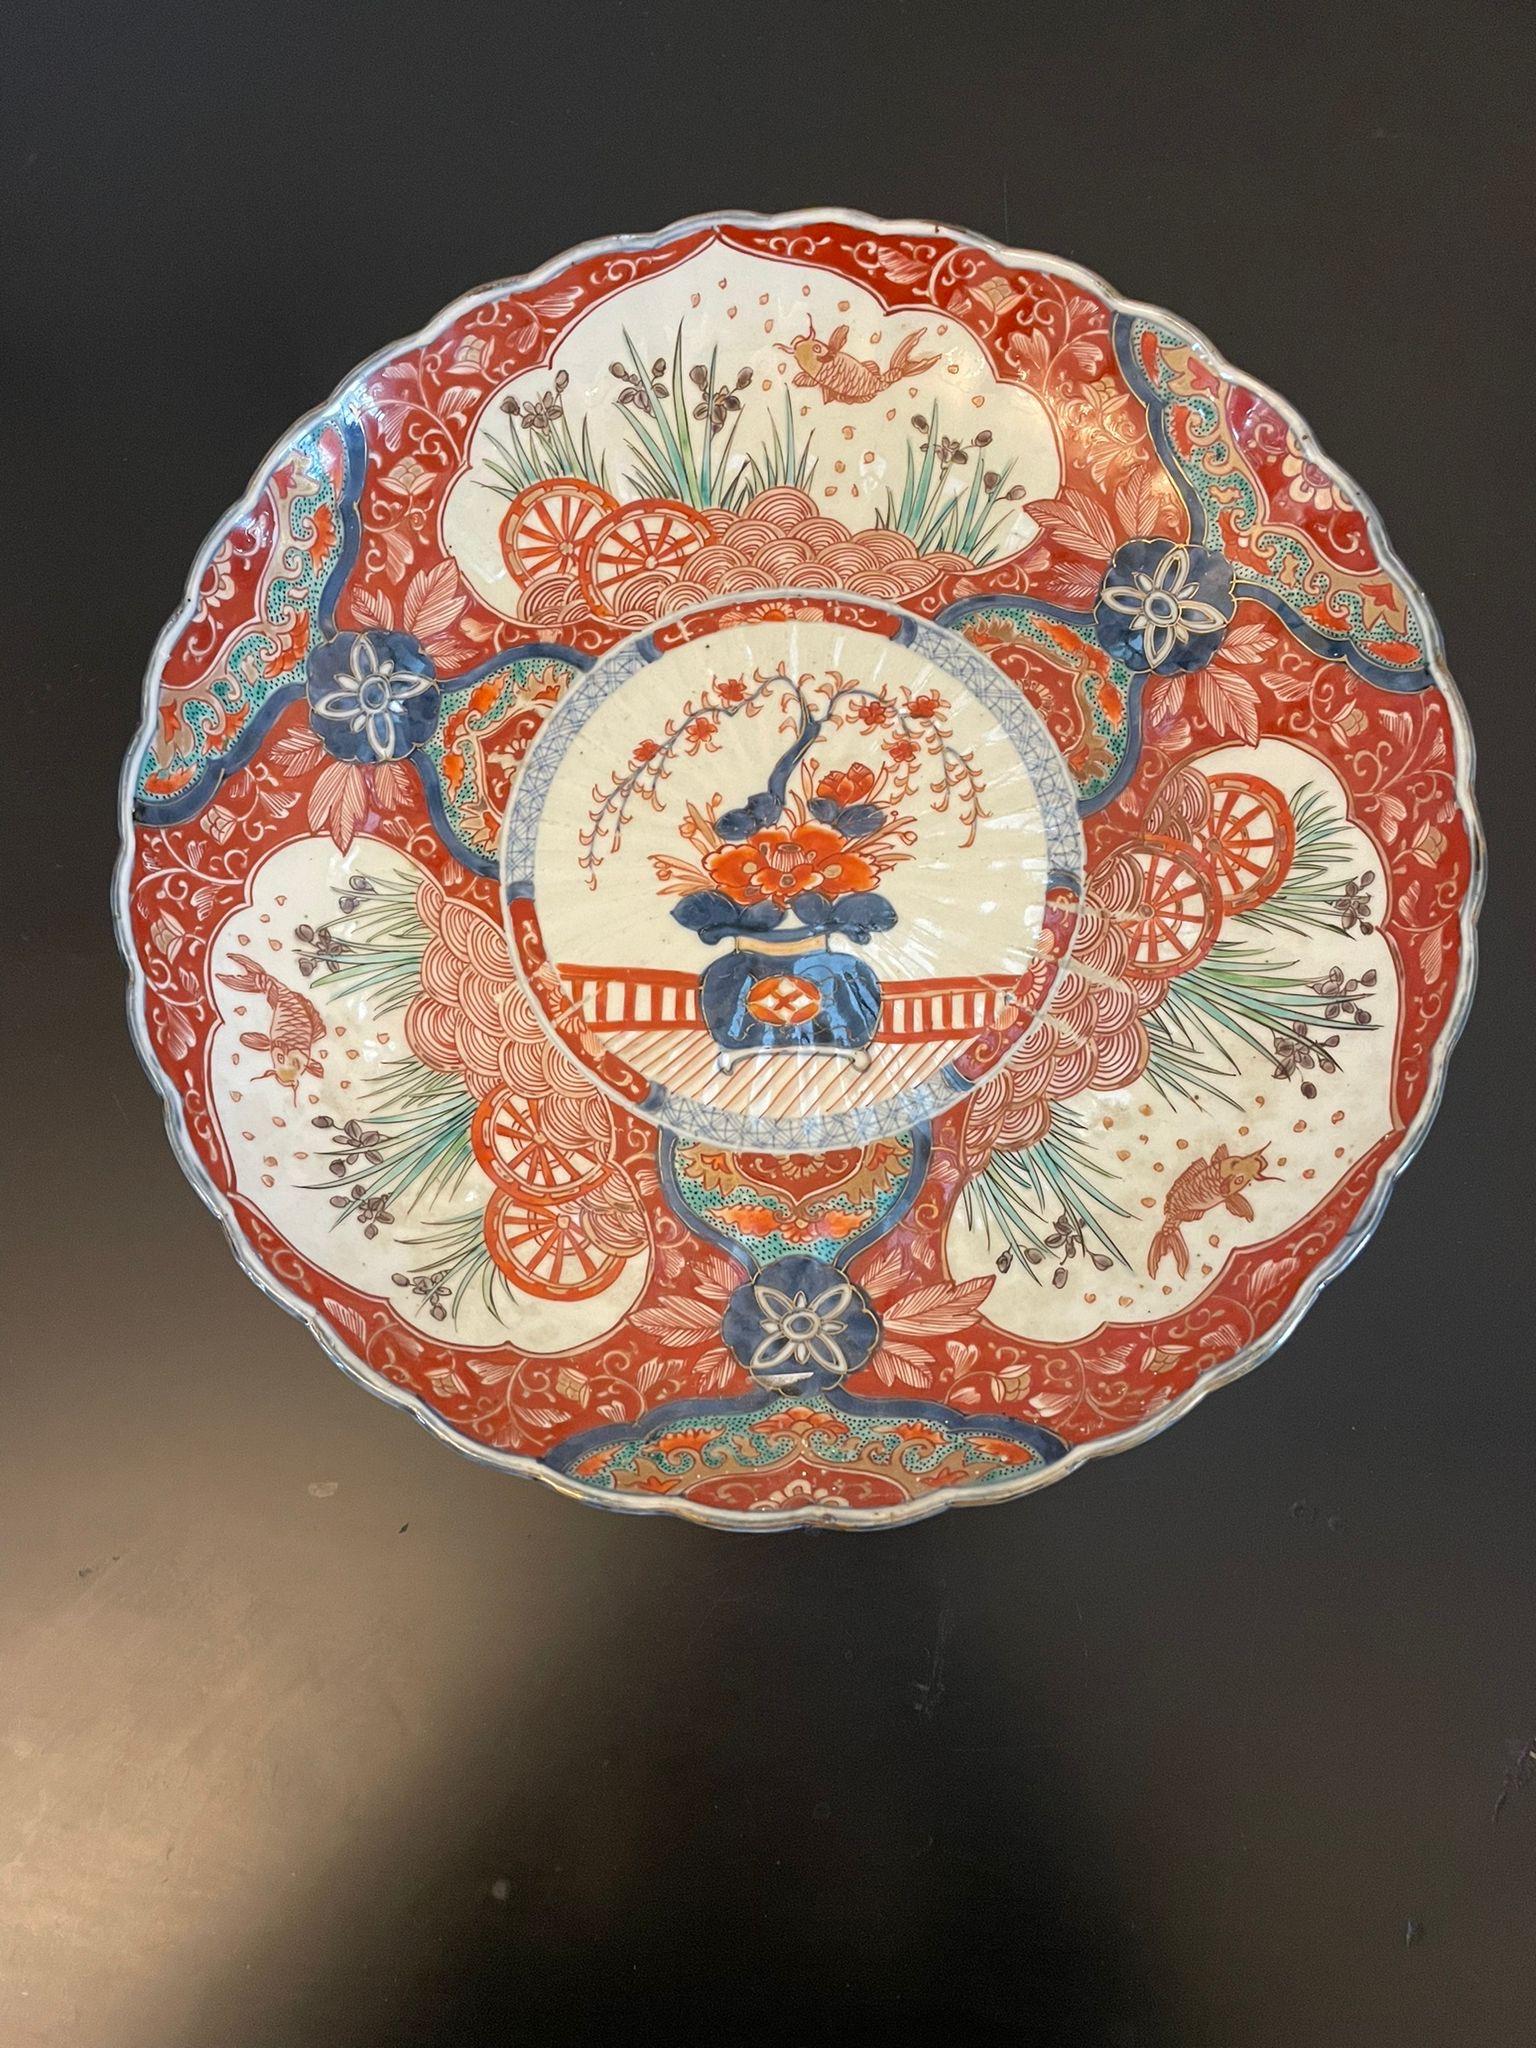 Quality antique Victorian Japanese Imari plate having fantastic hand painted panels of carp swinging in red, blue, green, orange, white and gold colours with a scalloped shaped edge 


In lovely original condition


Dimensions:
Height 5.5 cm